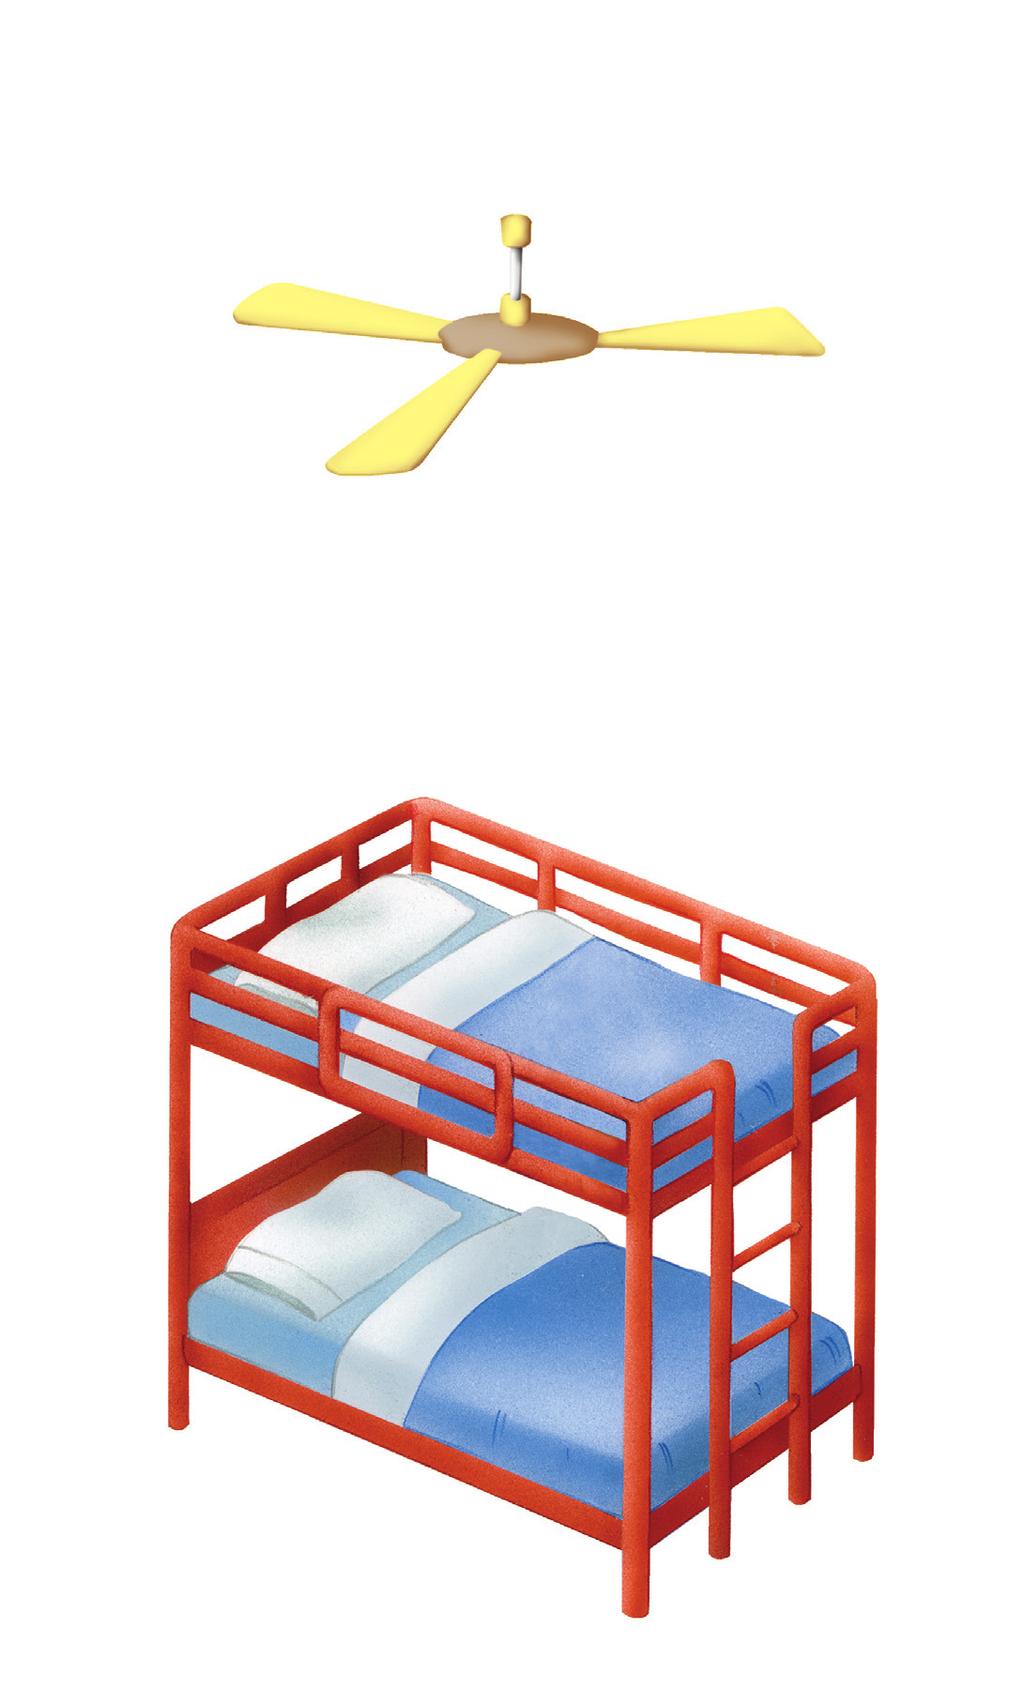 Critical compliance requirements Overview of safe gaps on bunk beds At least 2 m of clearance between ceiling fan and bunk bed. No gaps of between 95 mm and 230 mm.